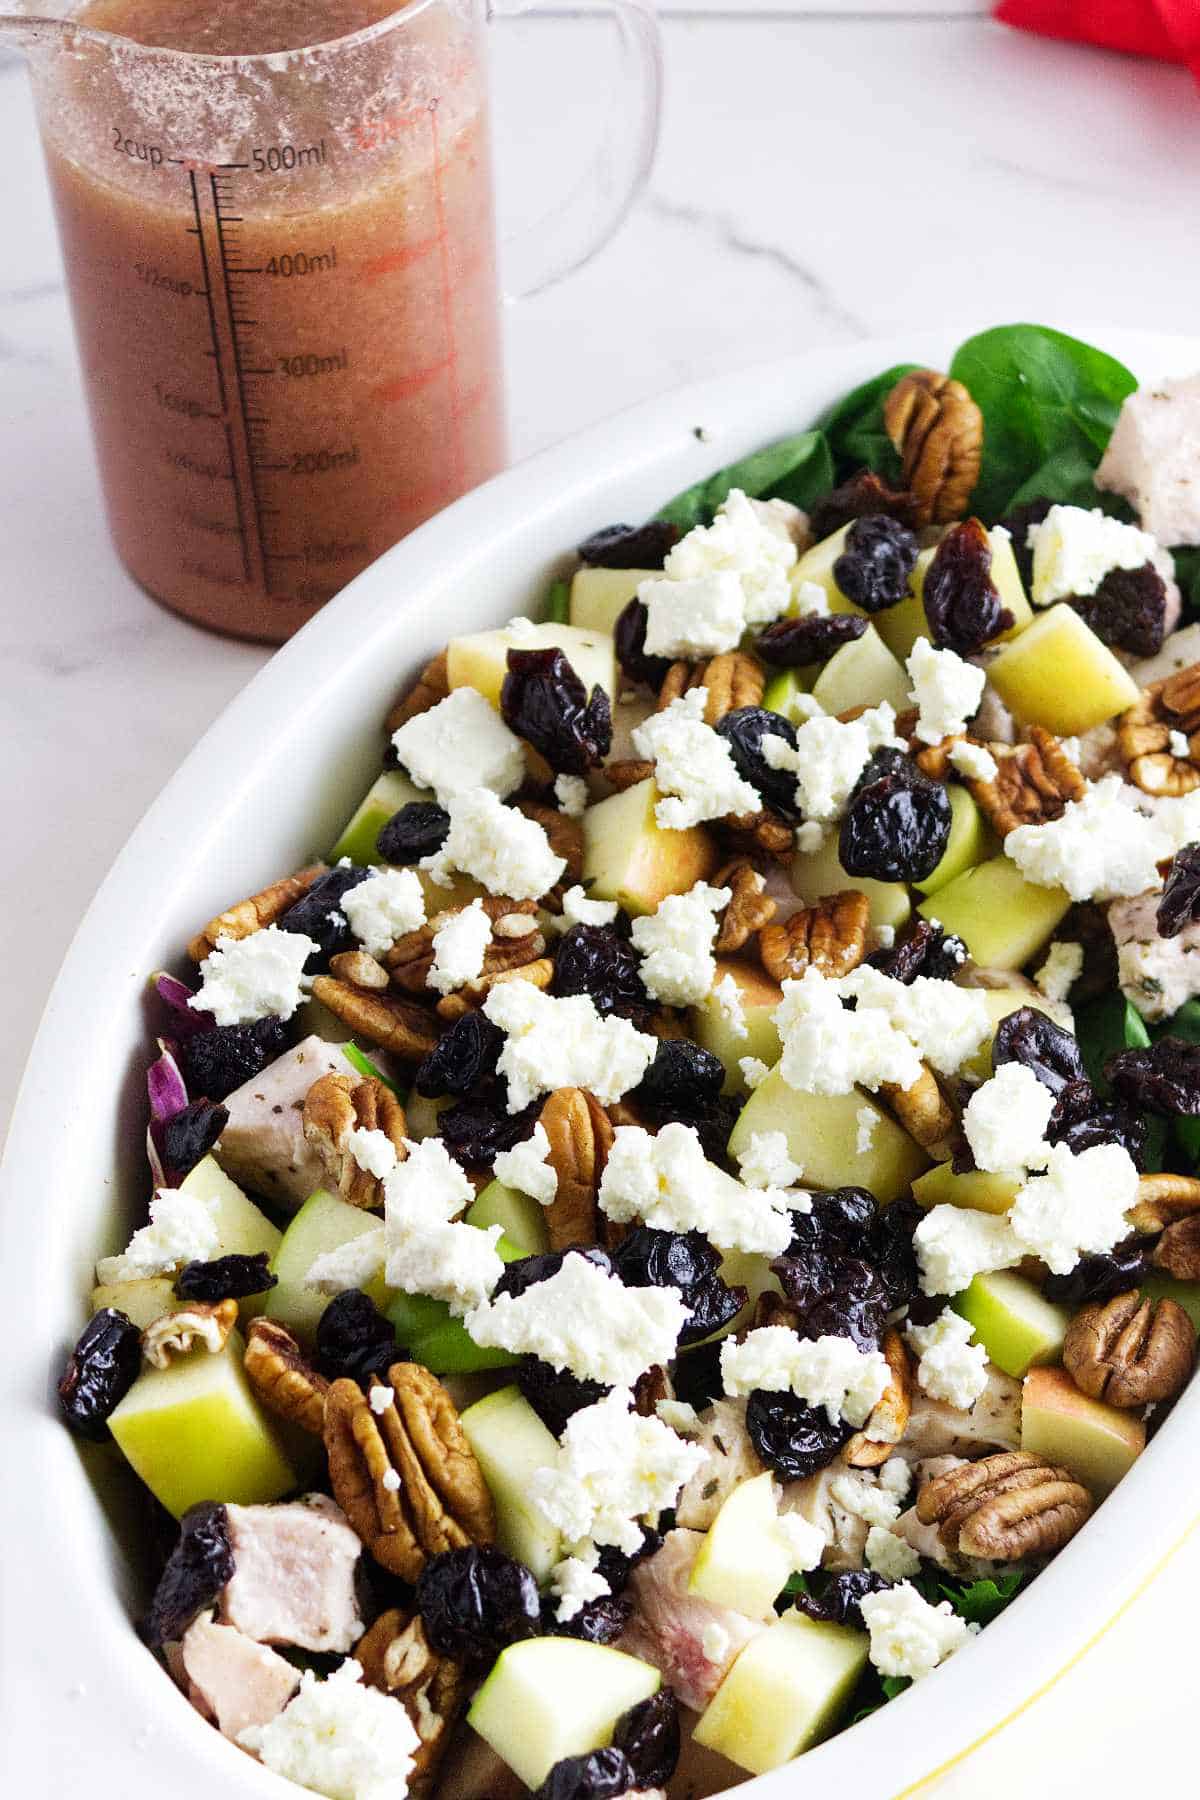 Pecans, bleu cheese crumbles, blueberries, on top of diced apples, chicken chunks and salad greens.